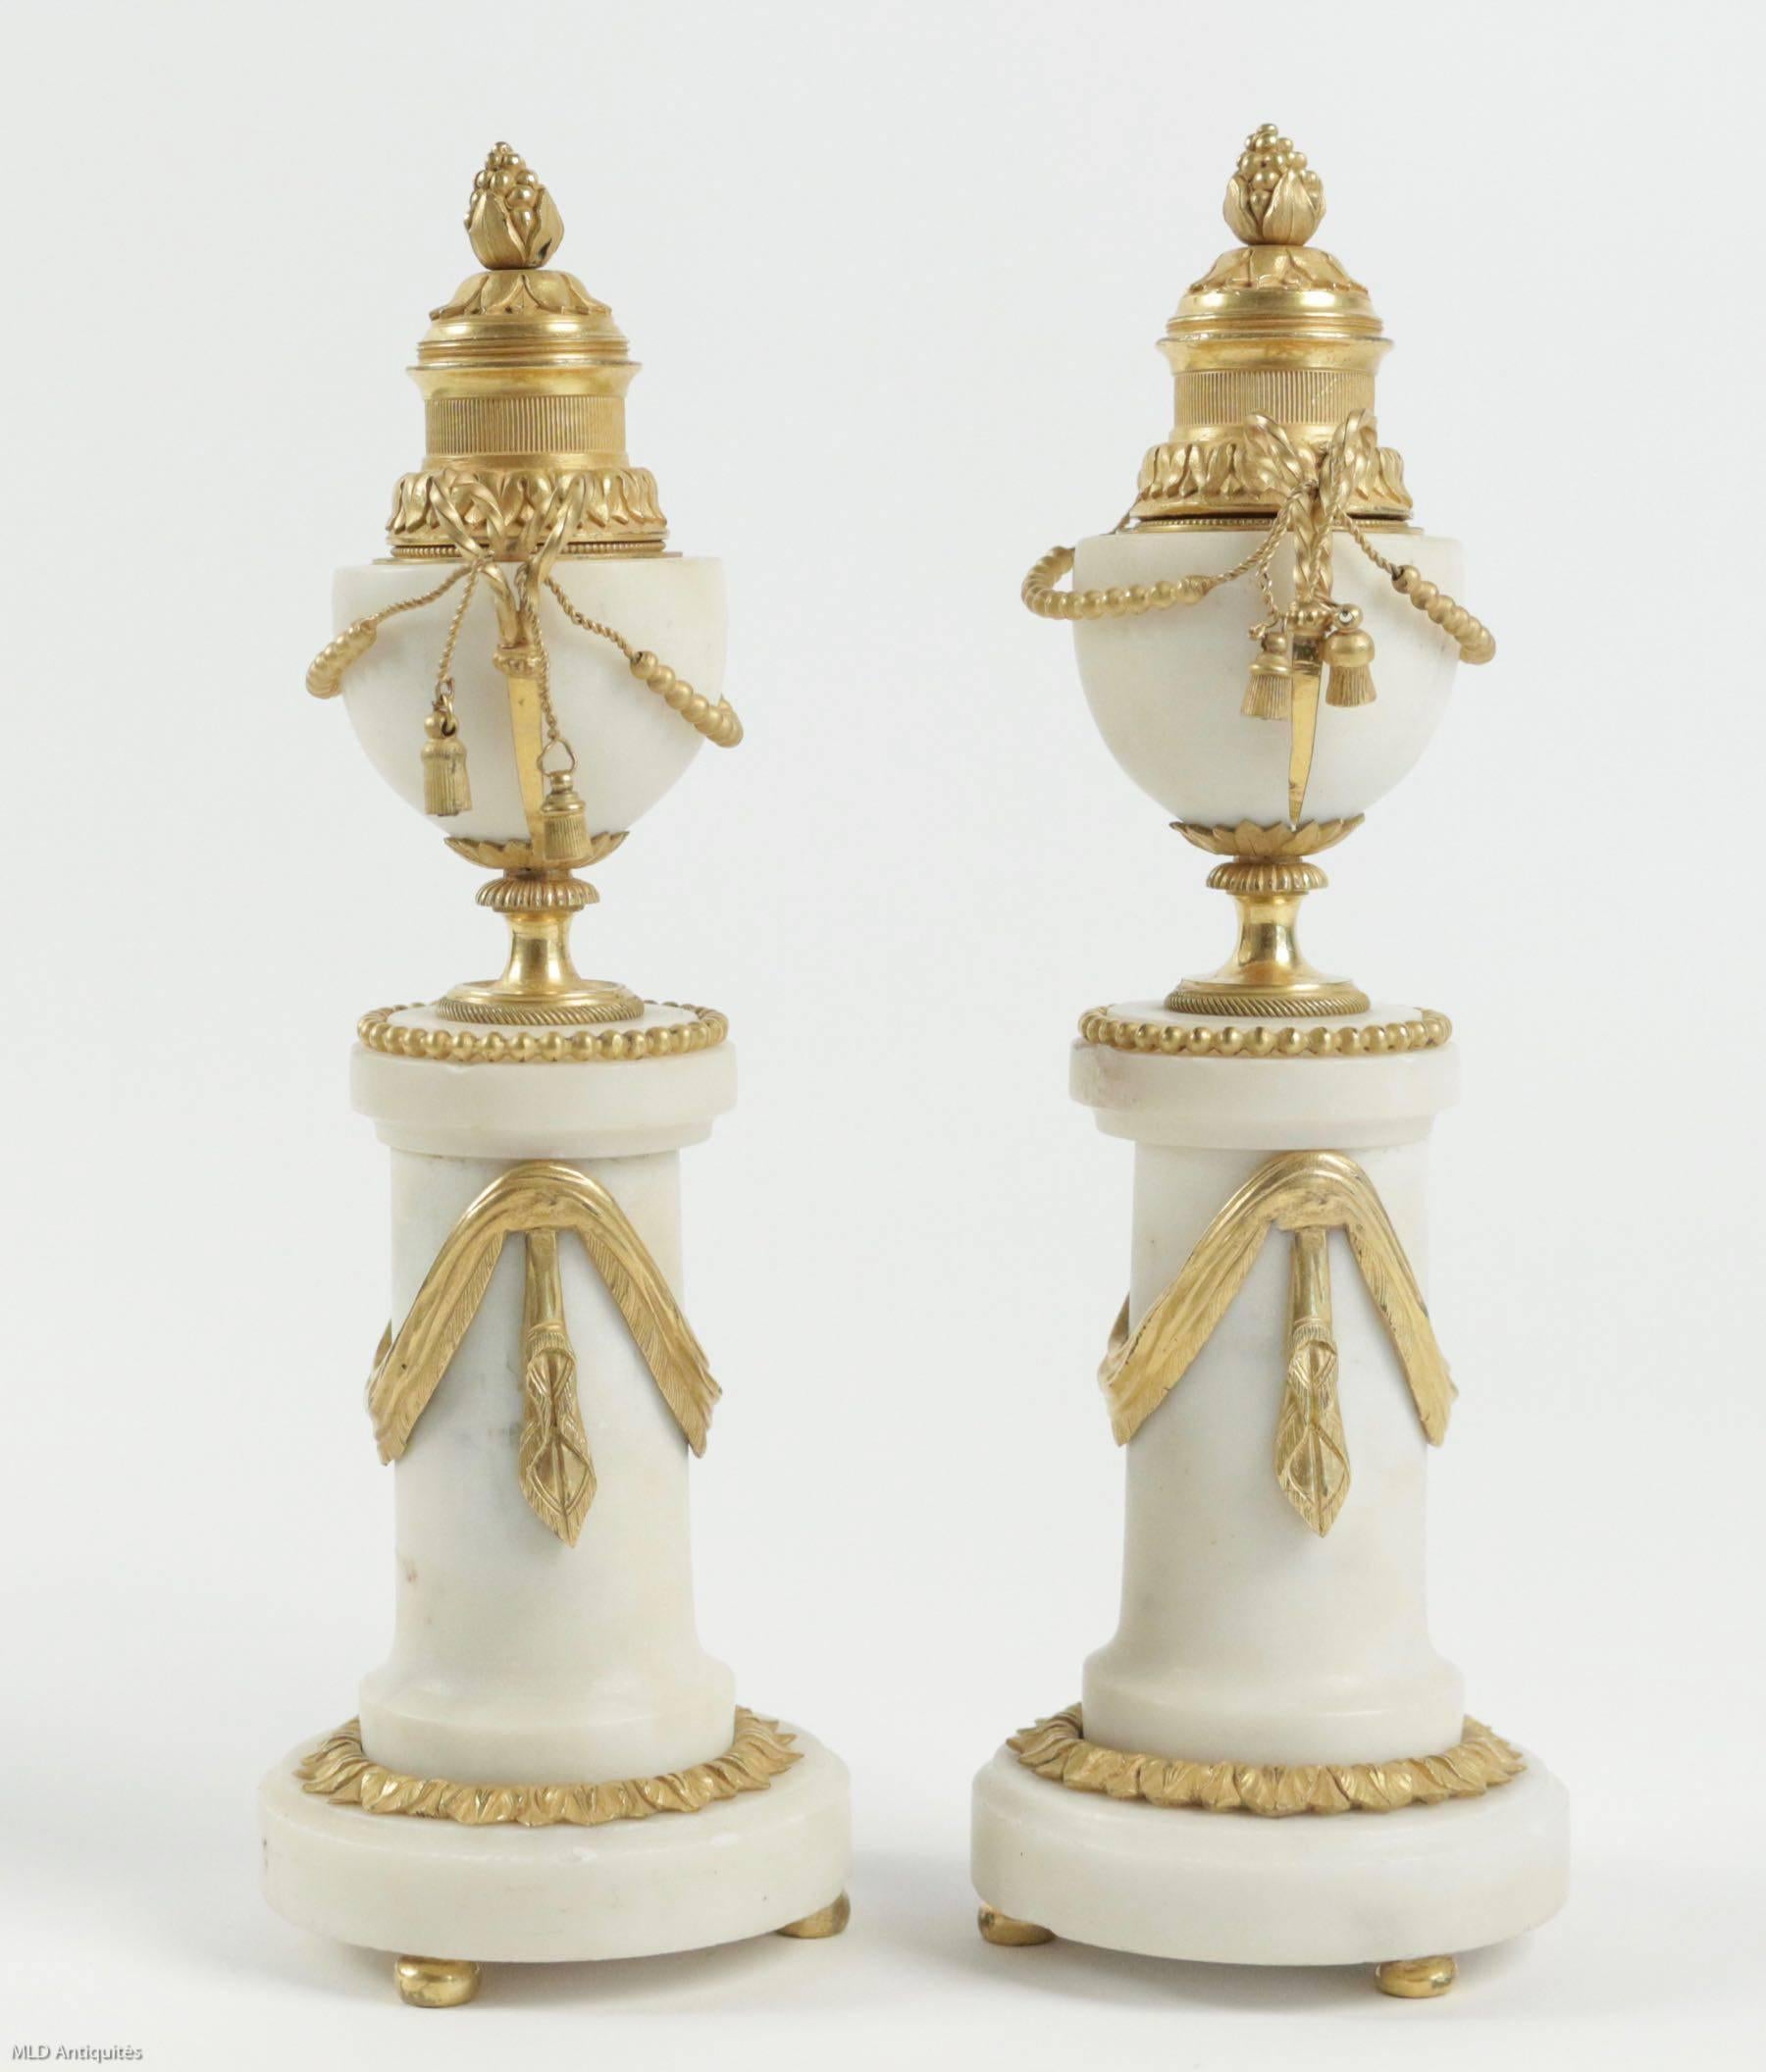 Lovely pair of cassolettes, the moving top is forming candlesticks.
Carrara marble and bronze finely carved in original beautiful gilding.
Gorgeous French Directoire period, manufactured late 18th century, circa 1795.

Measures: Candelabra